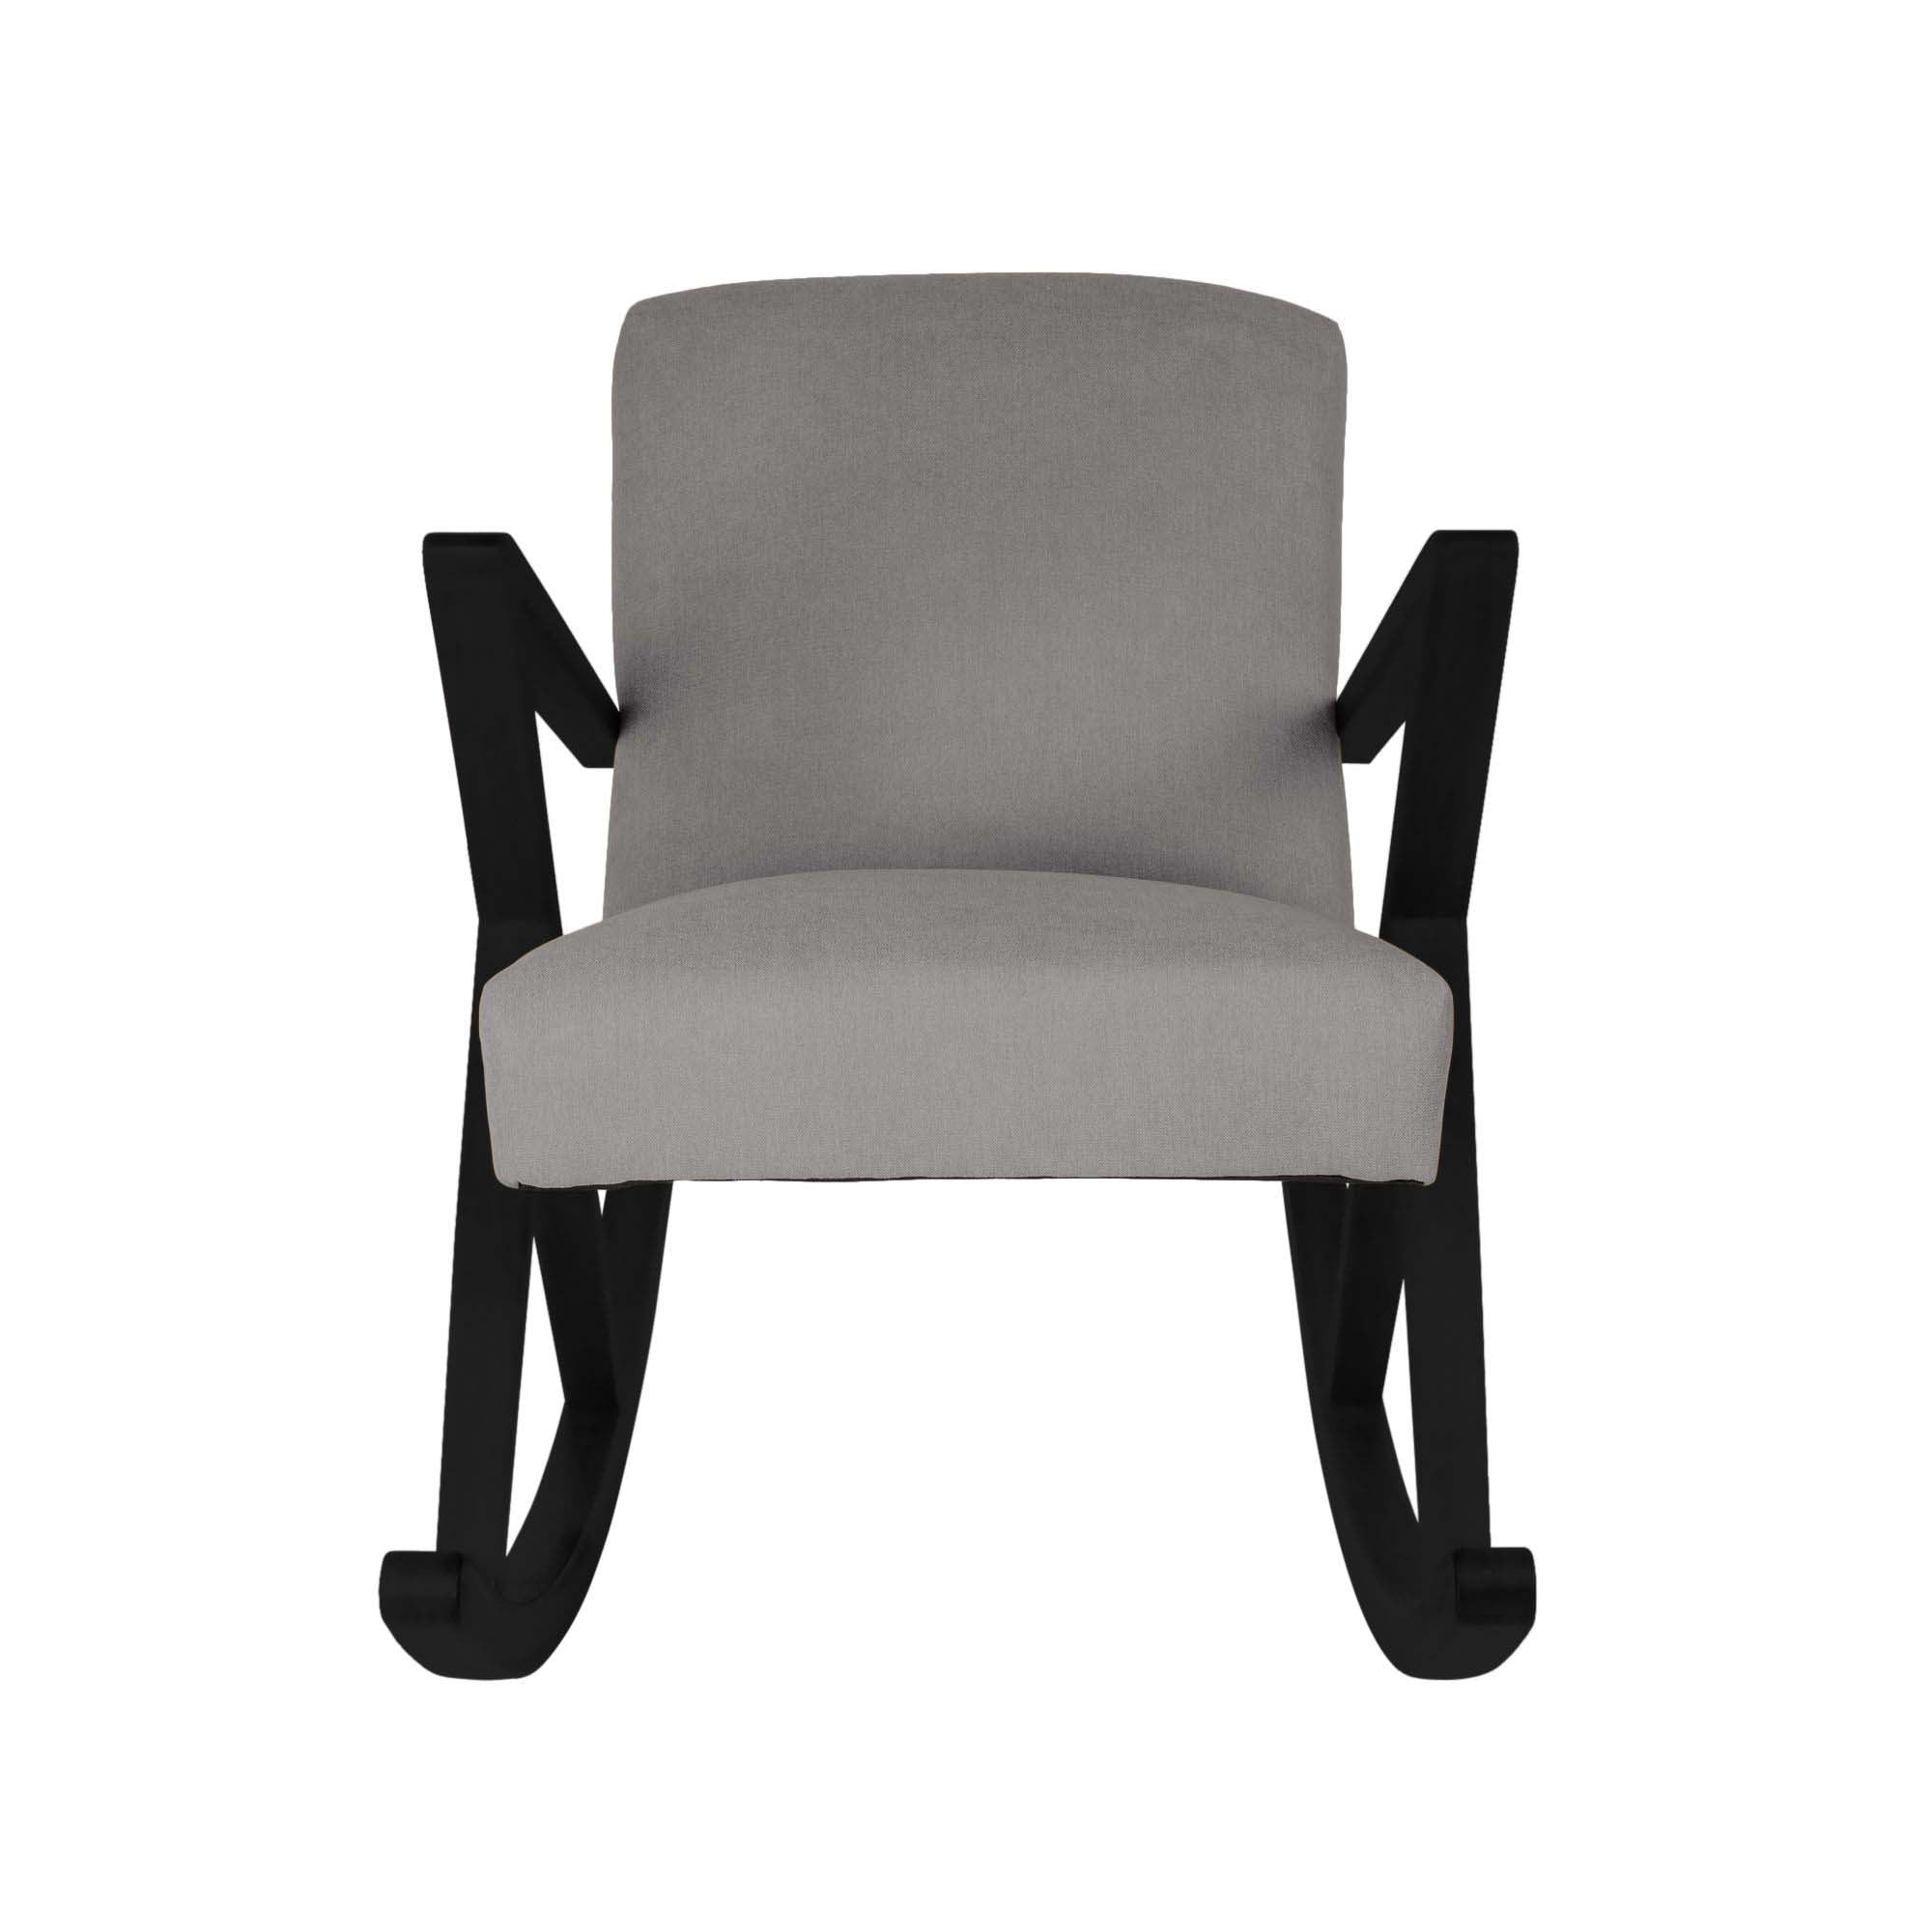 Rocking Chair, Beech Wood Frame, Black Lacquered grey fabric, front view